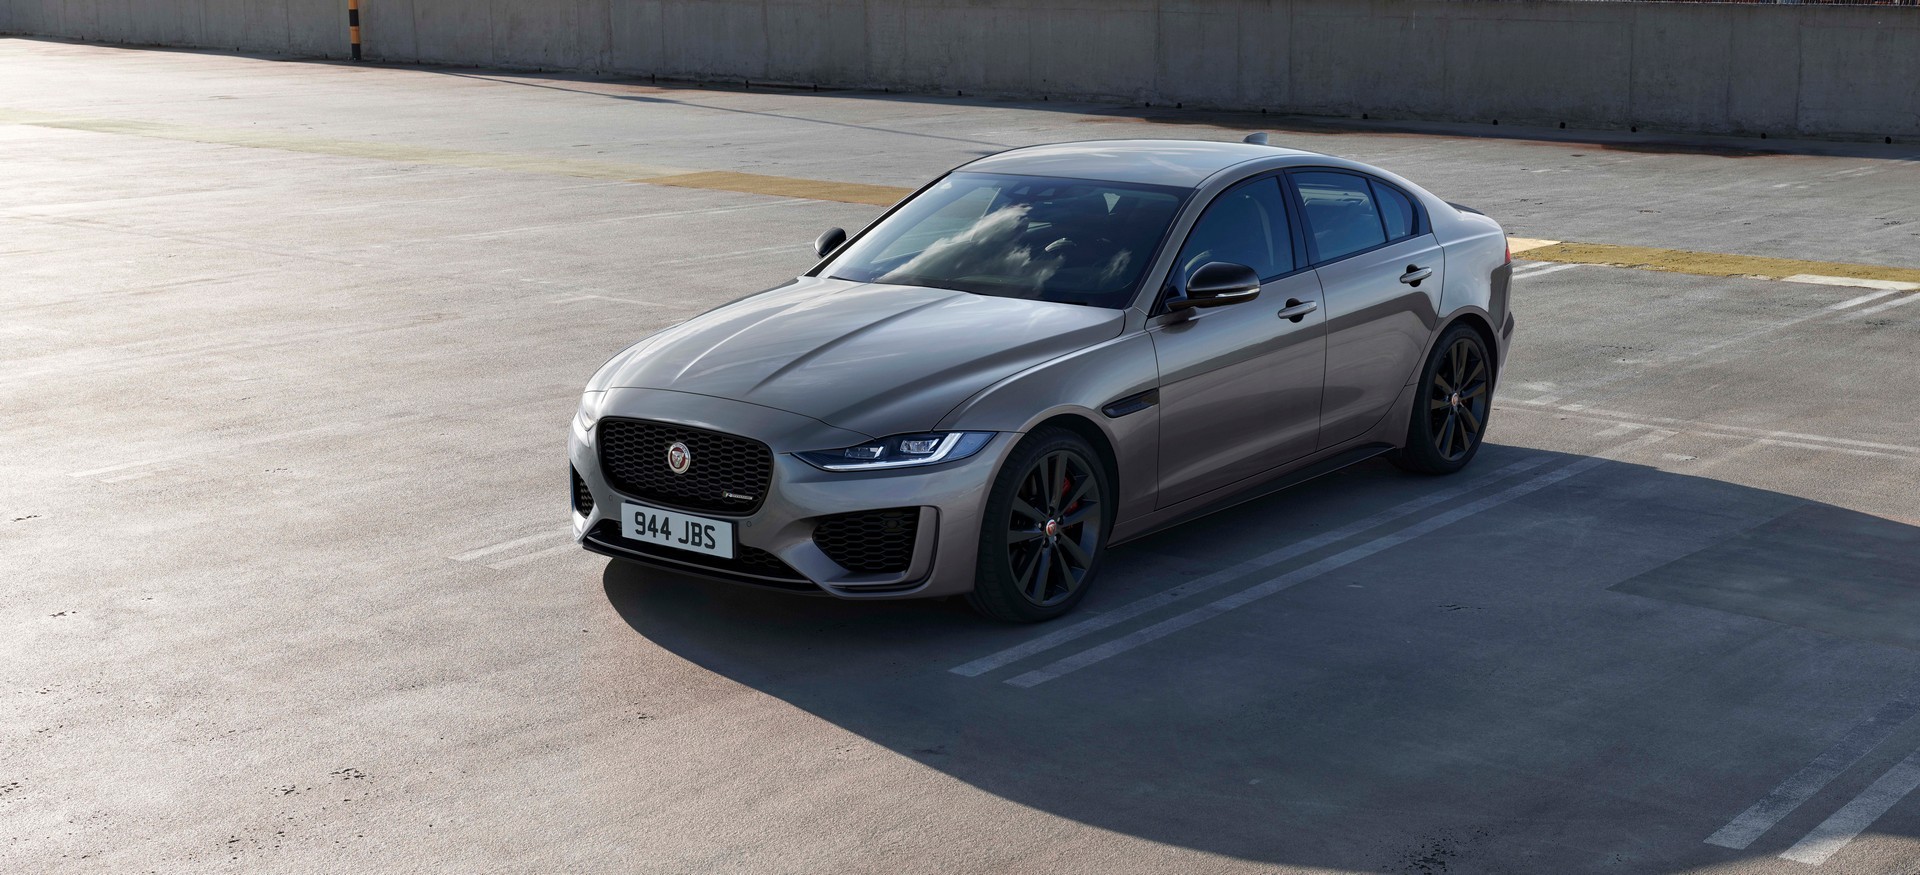 2021 Jaguar XE Gets Pivi Pro and MHEV Diesel, Just Like Its Larger ...